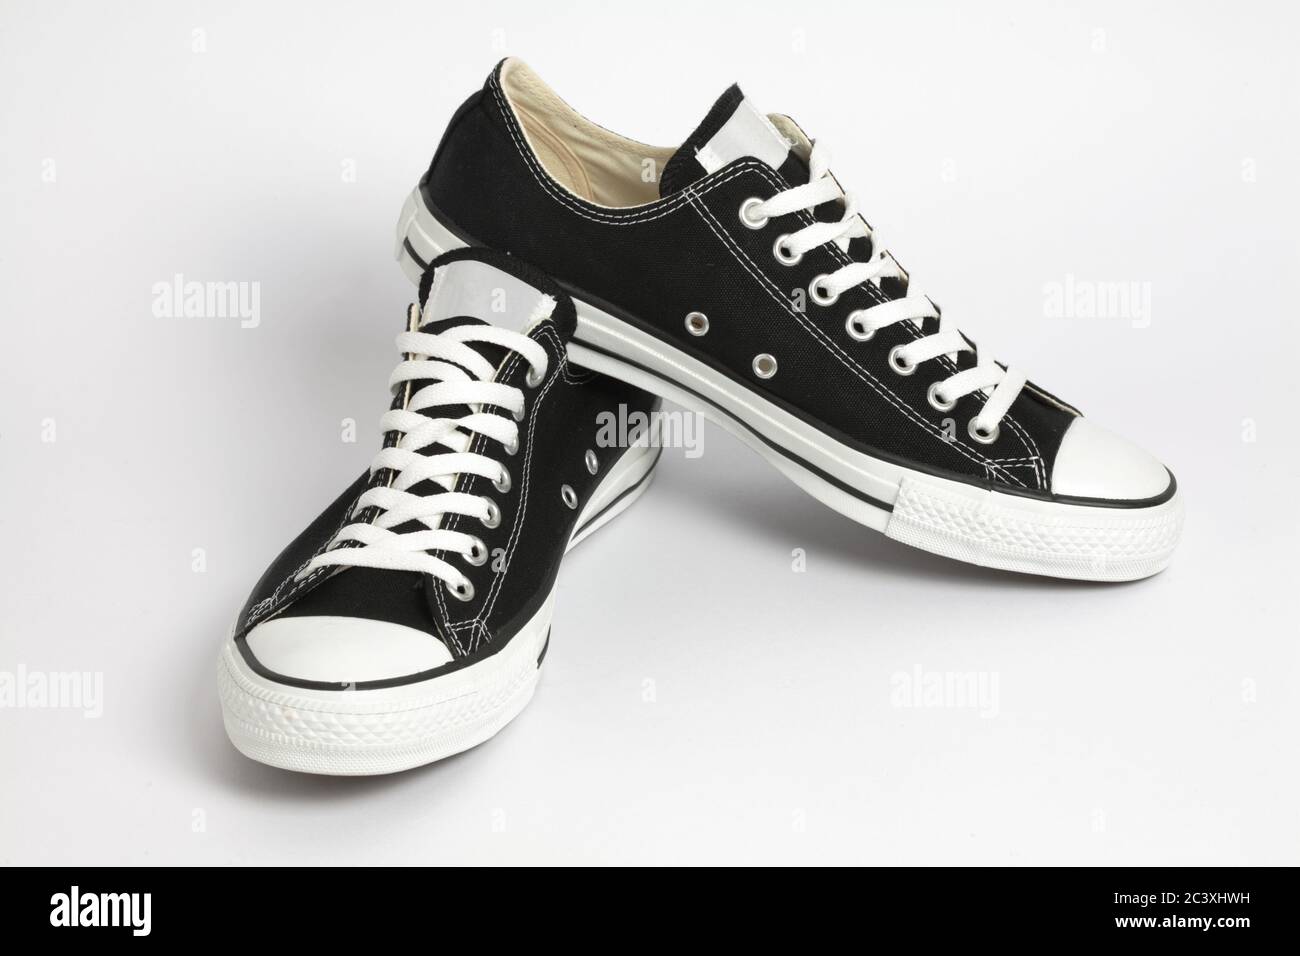 Black canvas sneakers, isolated Stock Photo